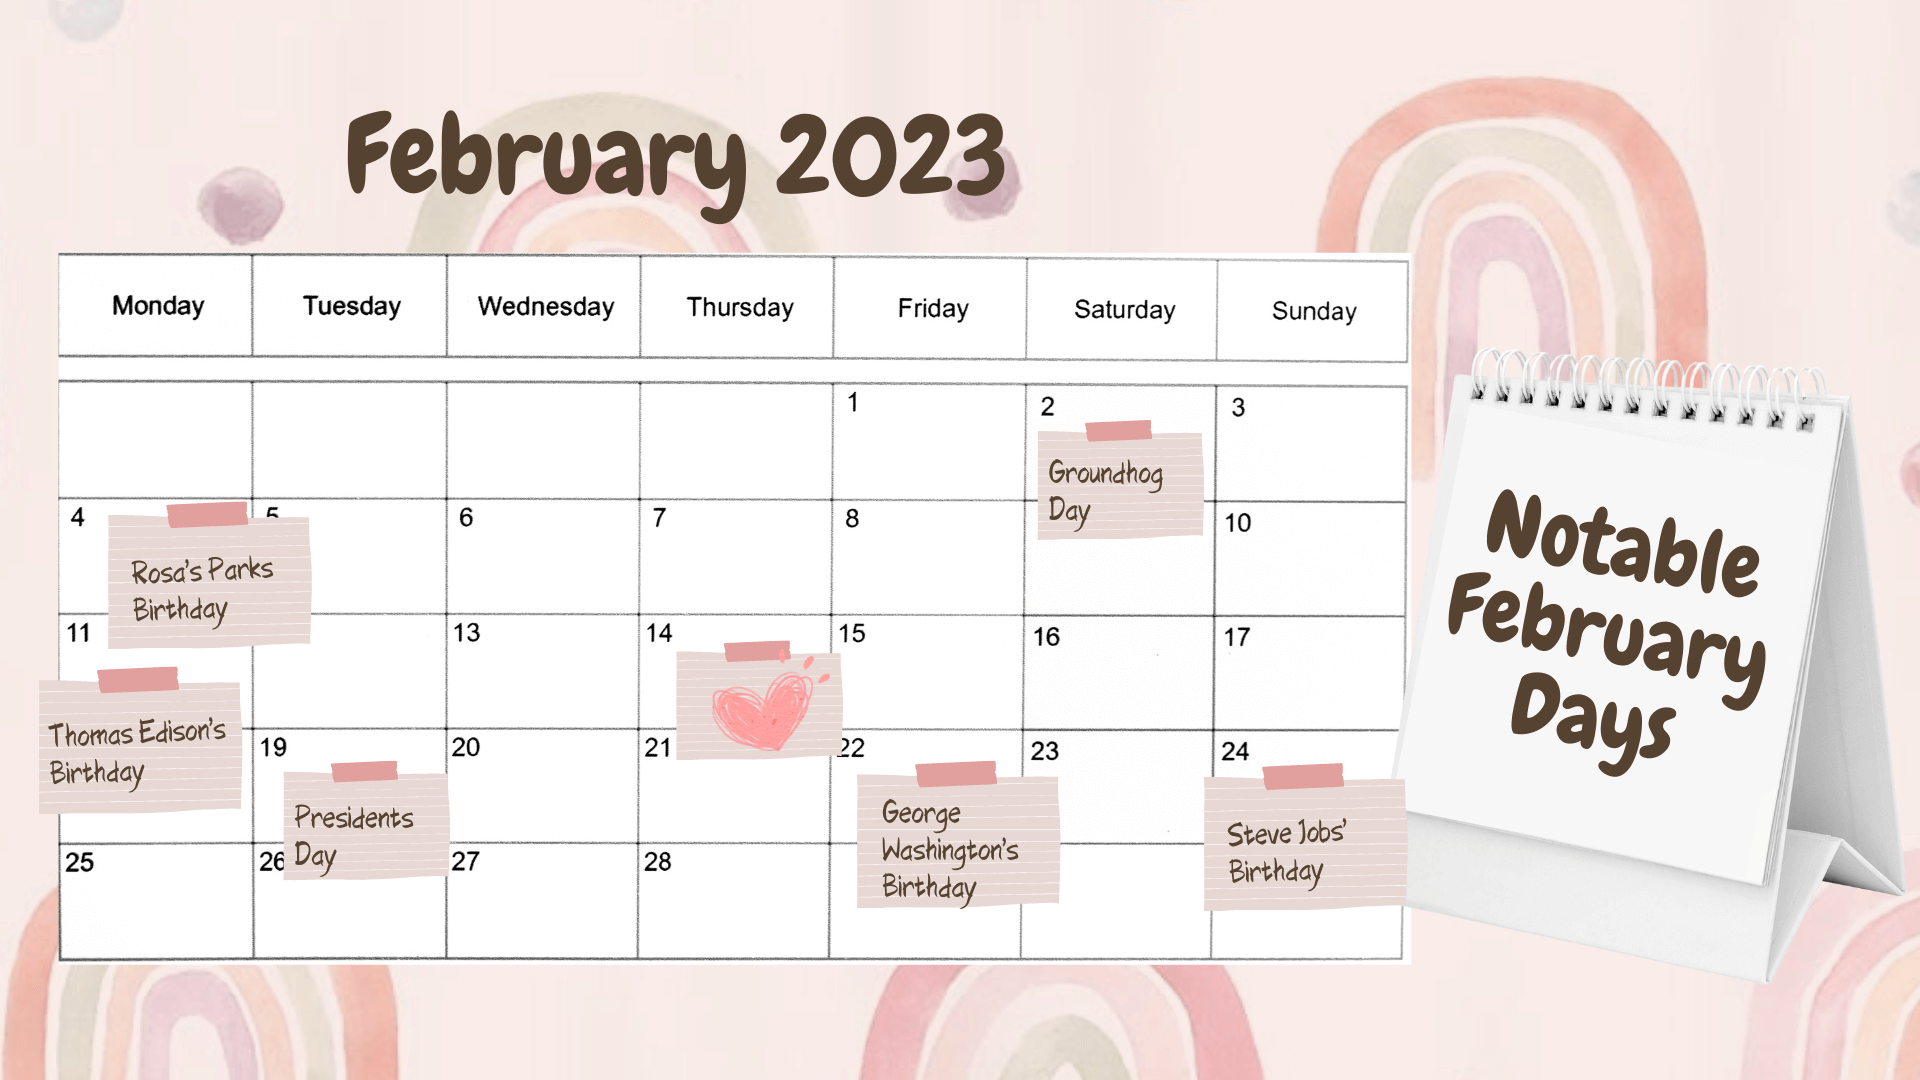 Notable Days in the Month of February